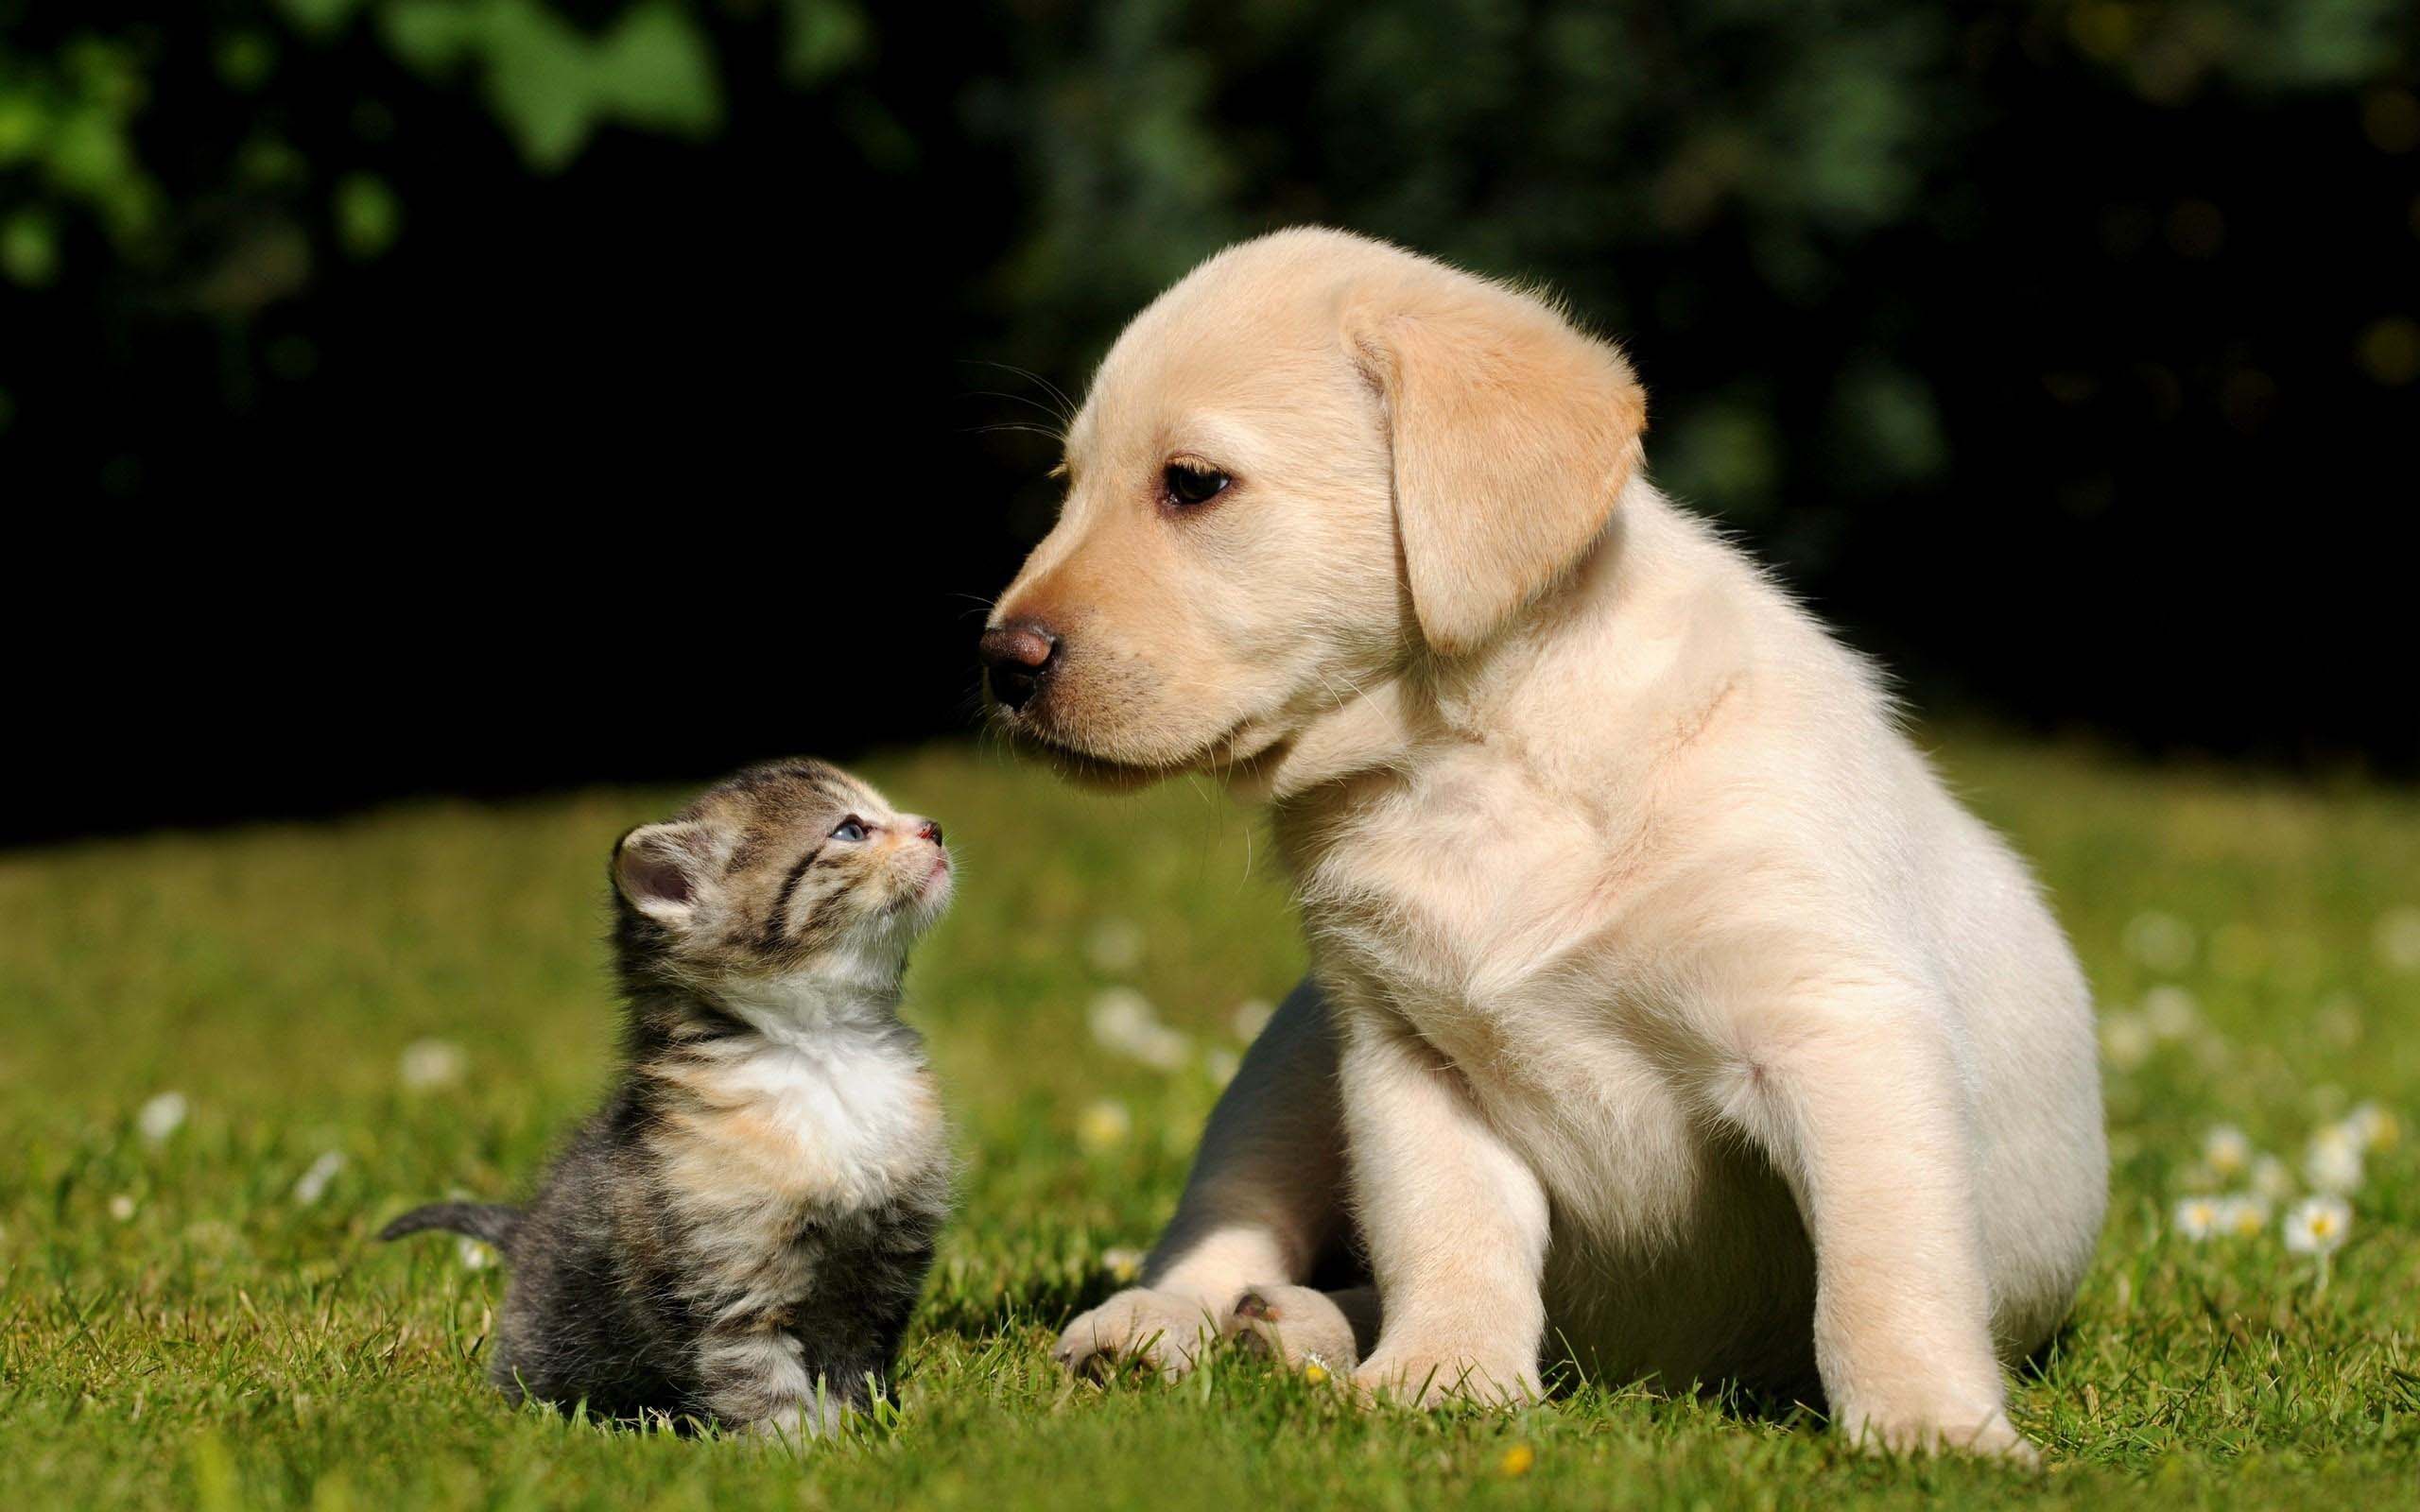 Cute dog and cat pictures together